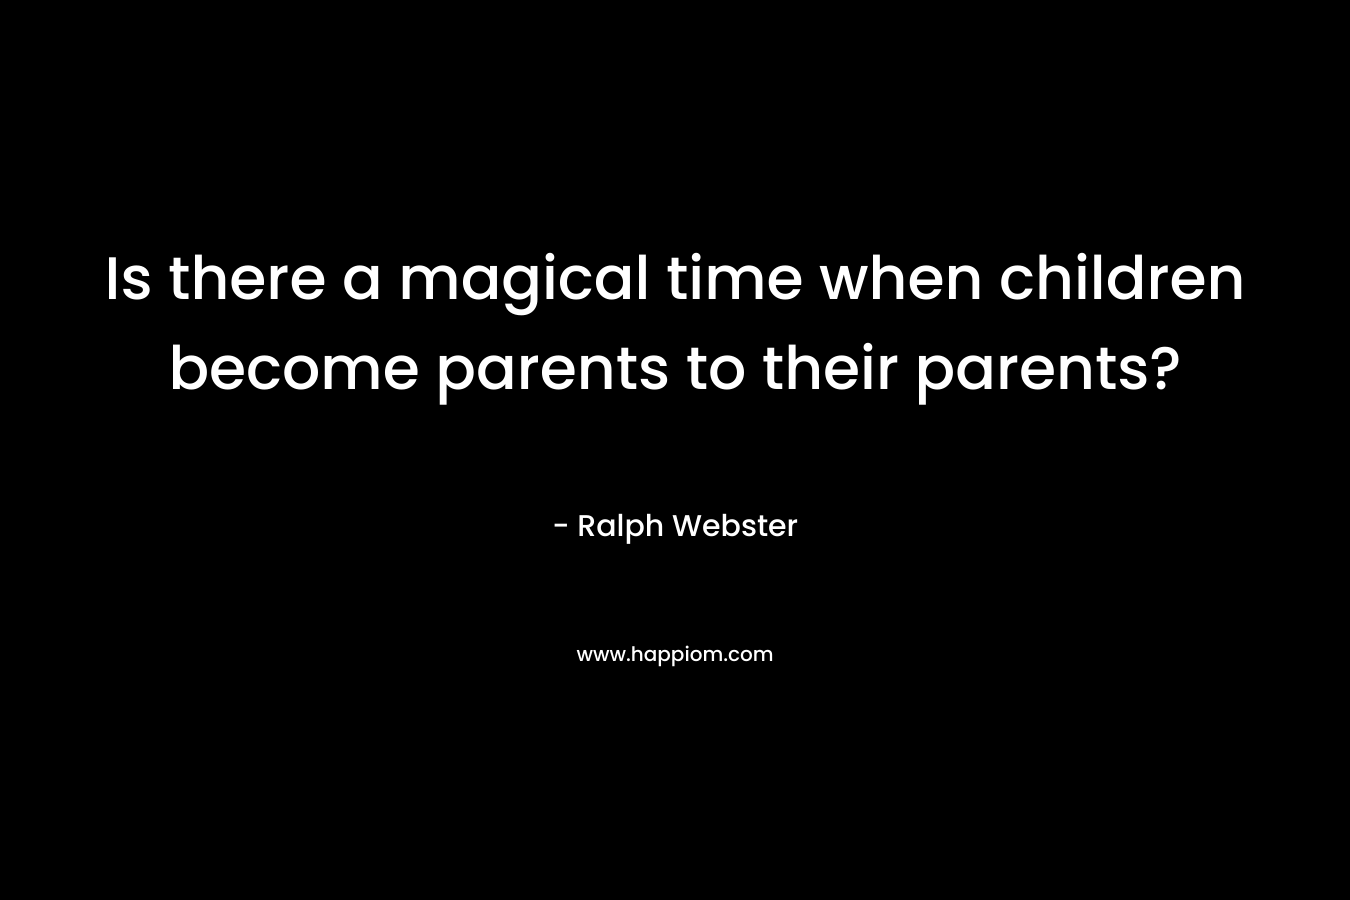 Is there a magical time when children become parents to their parents?